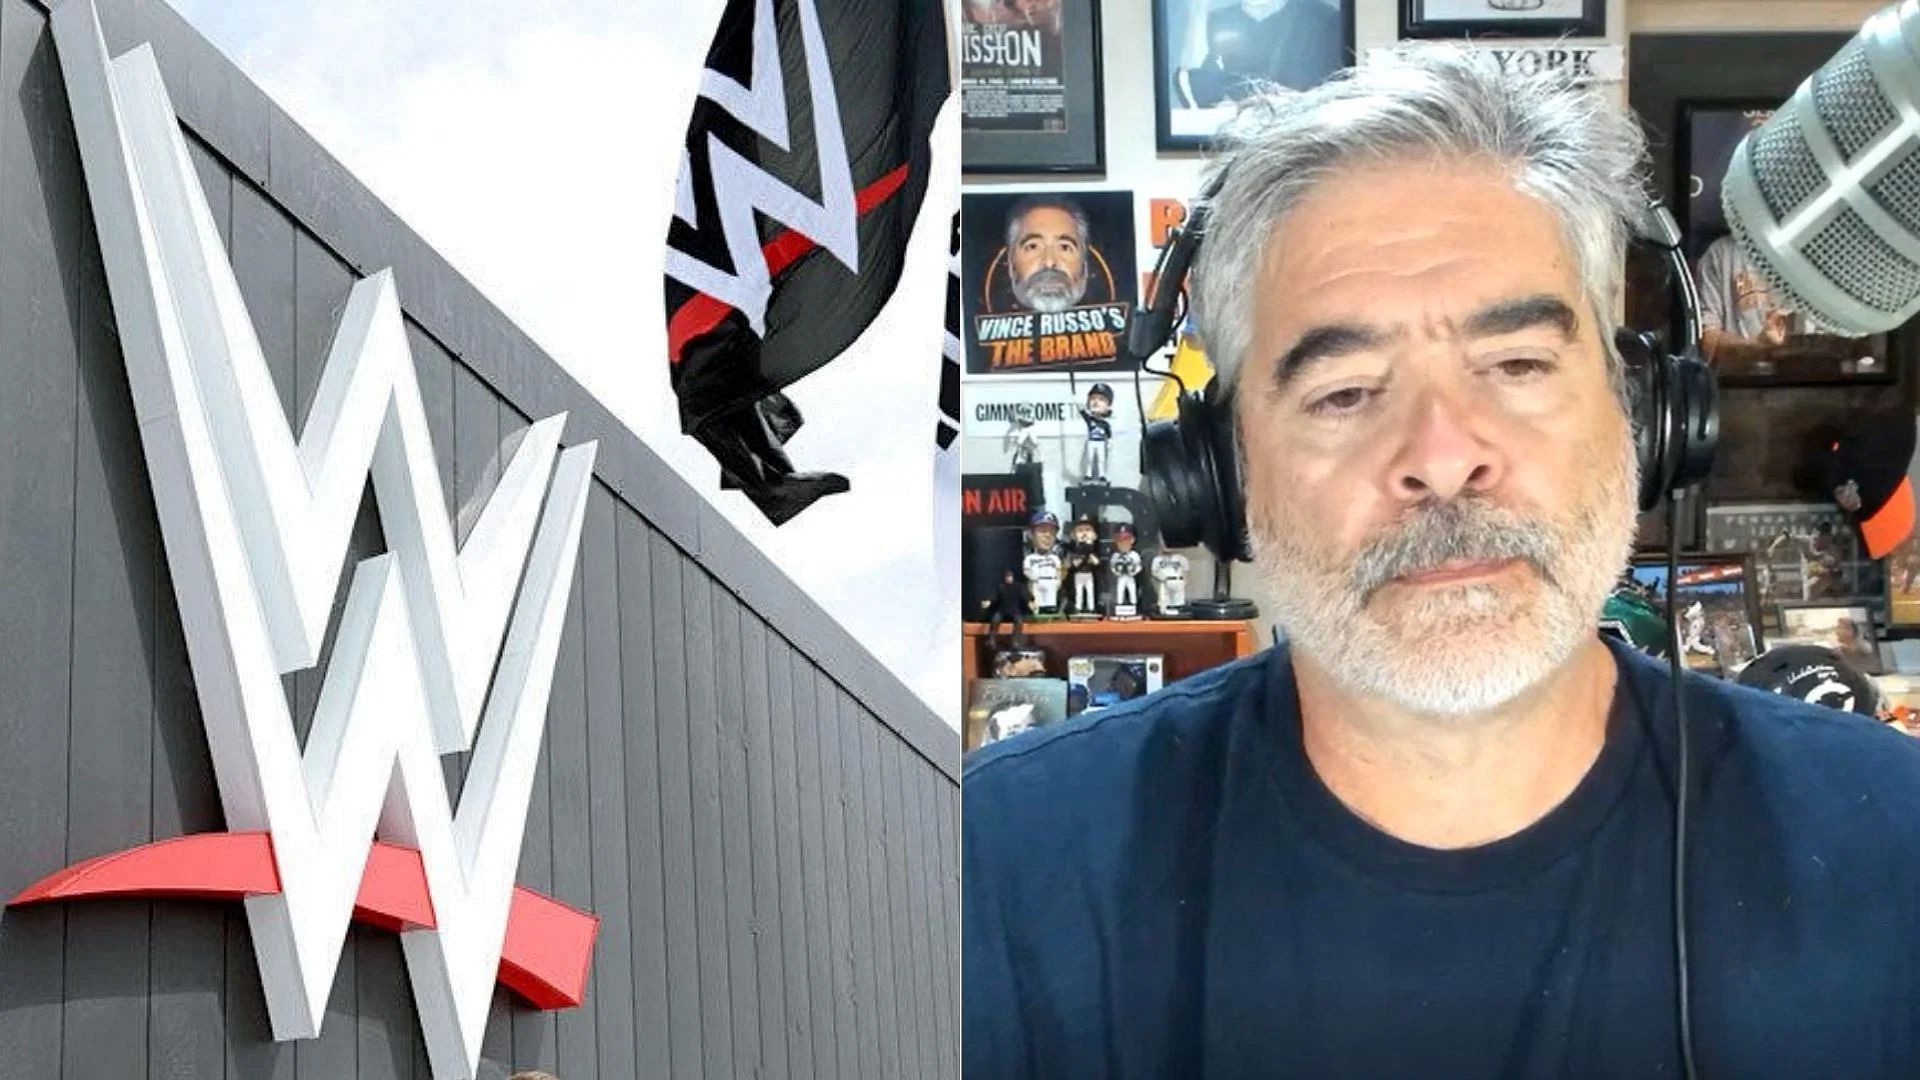 Vince Russo once held the WCW World Heavyweight Championship